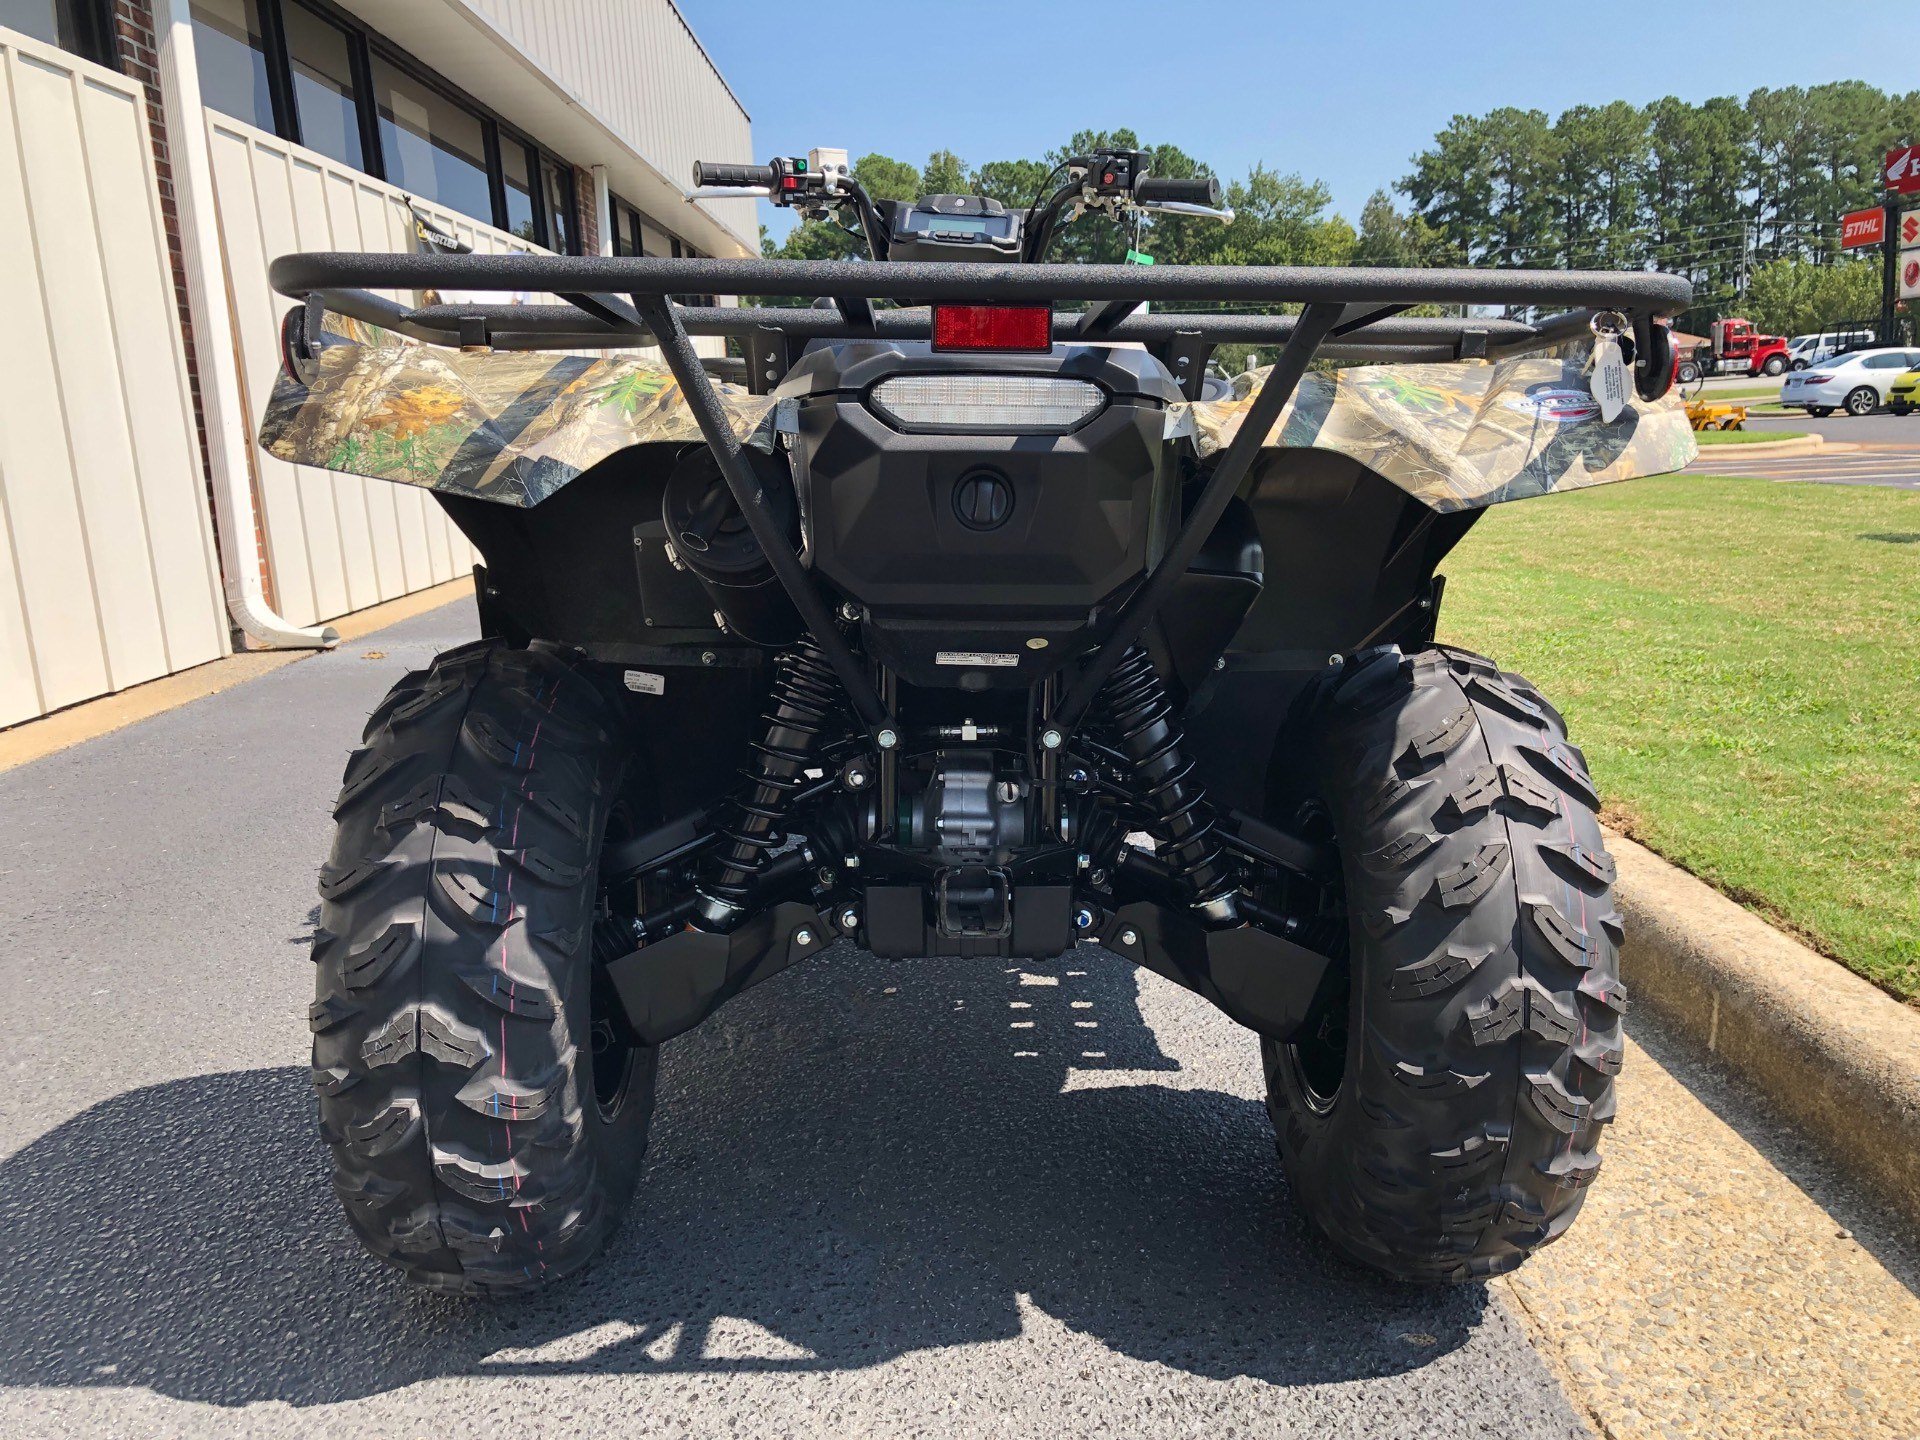 2021 Yamaha Grizzly EPS in Greenville, North Carolina - Photo 10